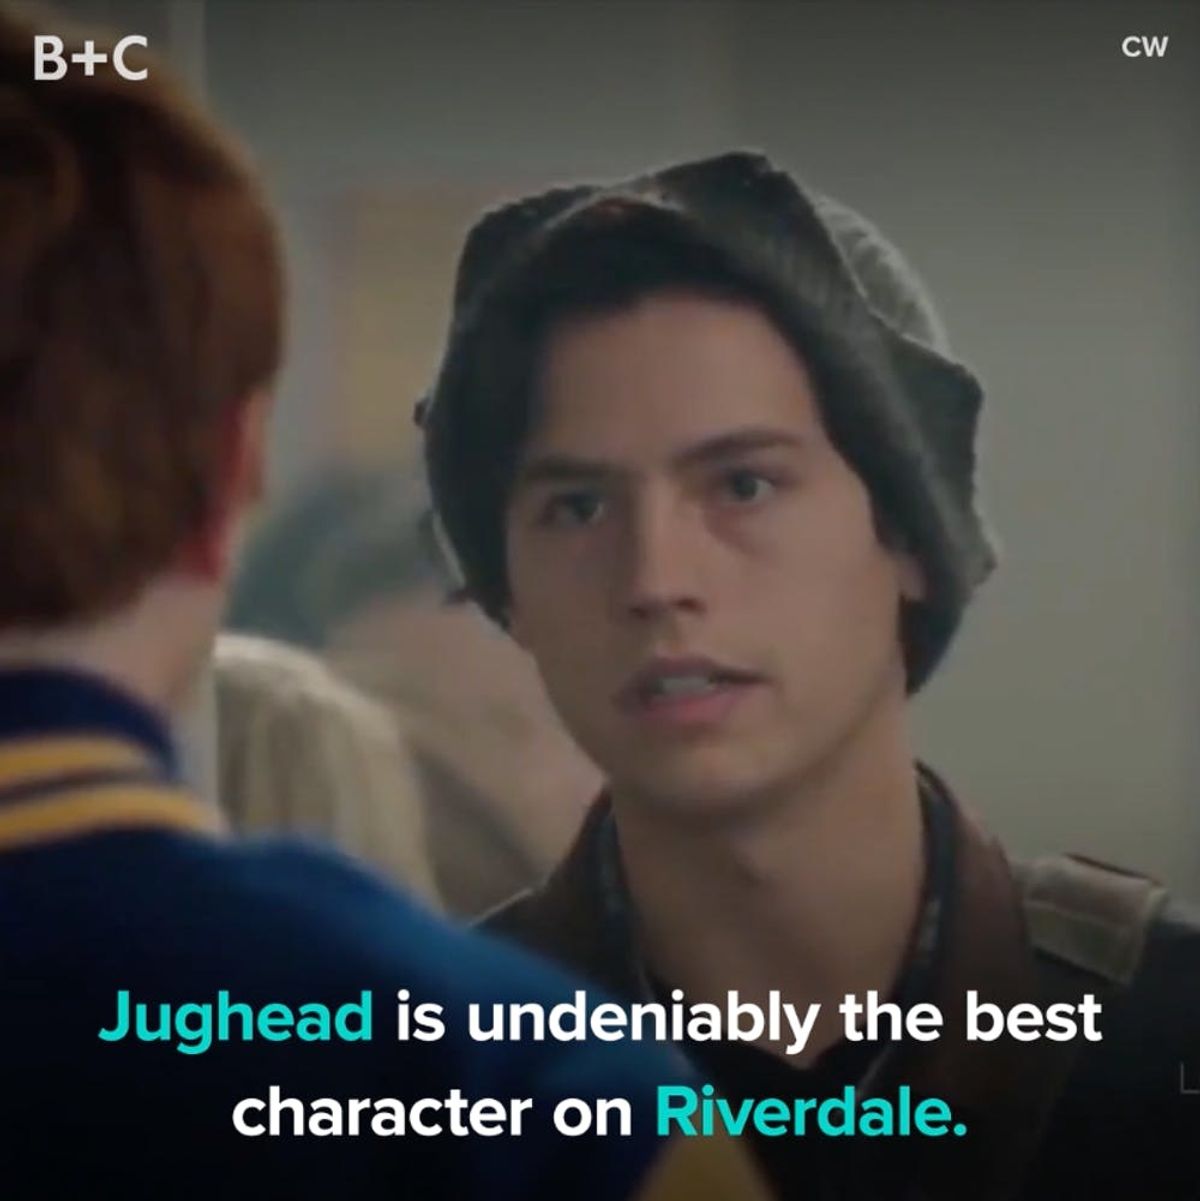 Jughead Is Undeniably the Best Character On Riverdale